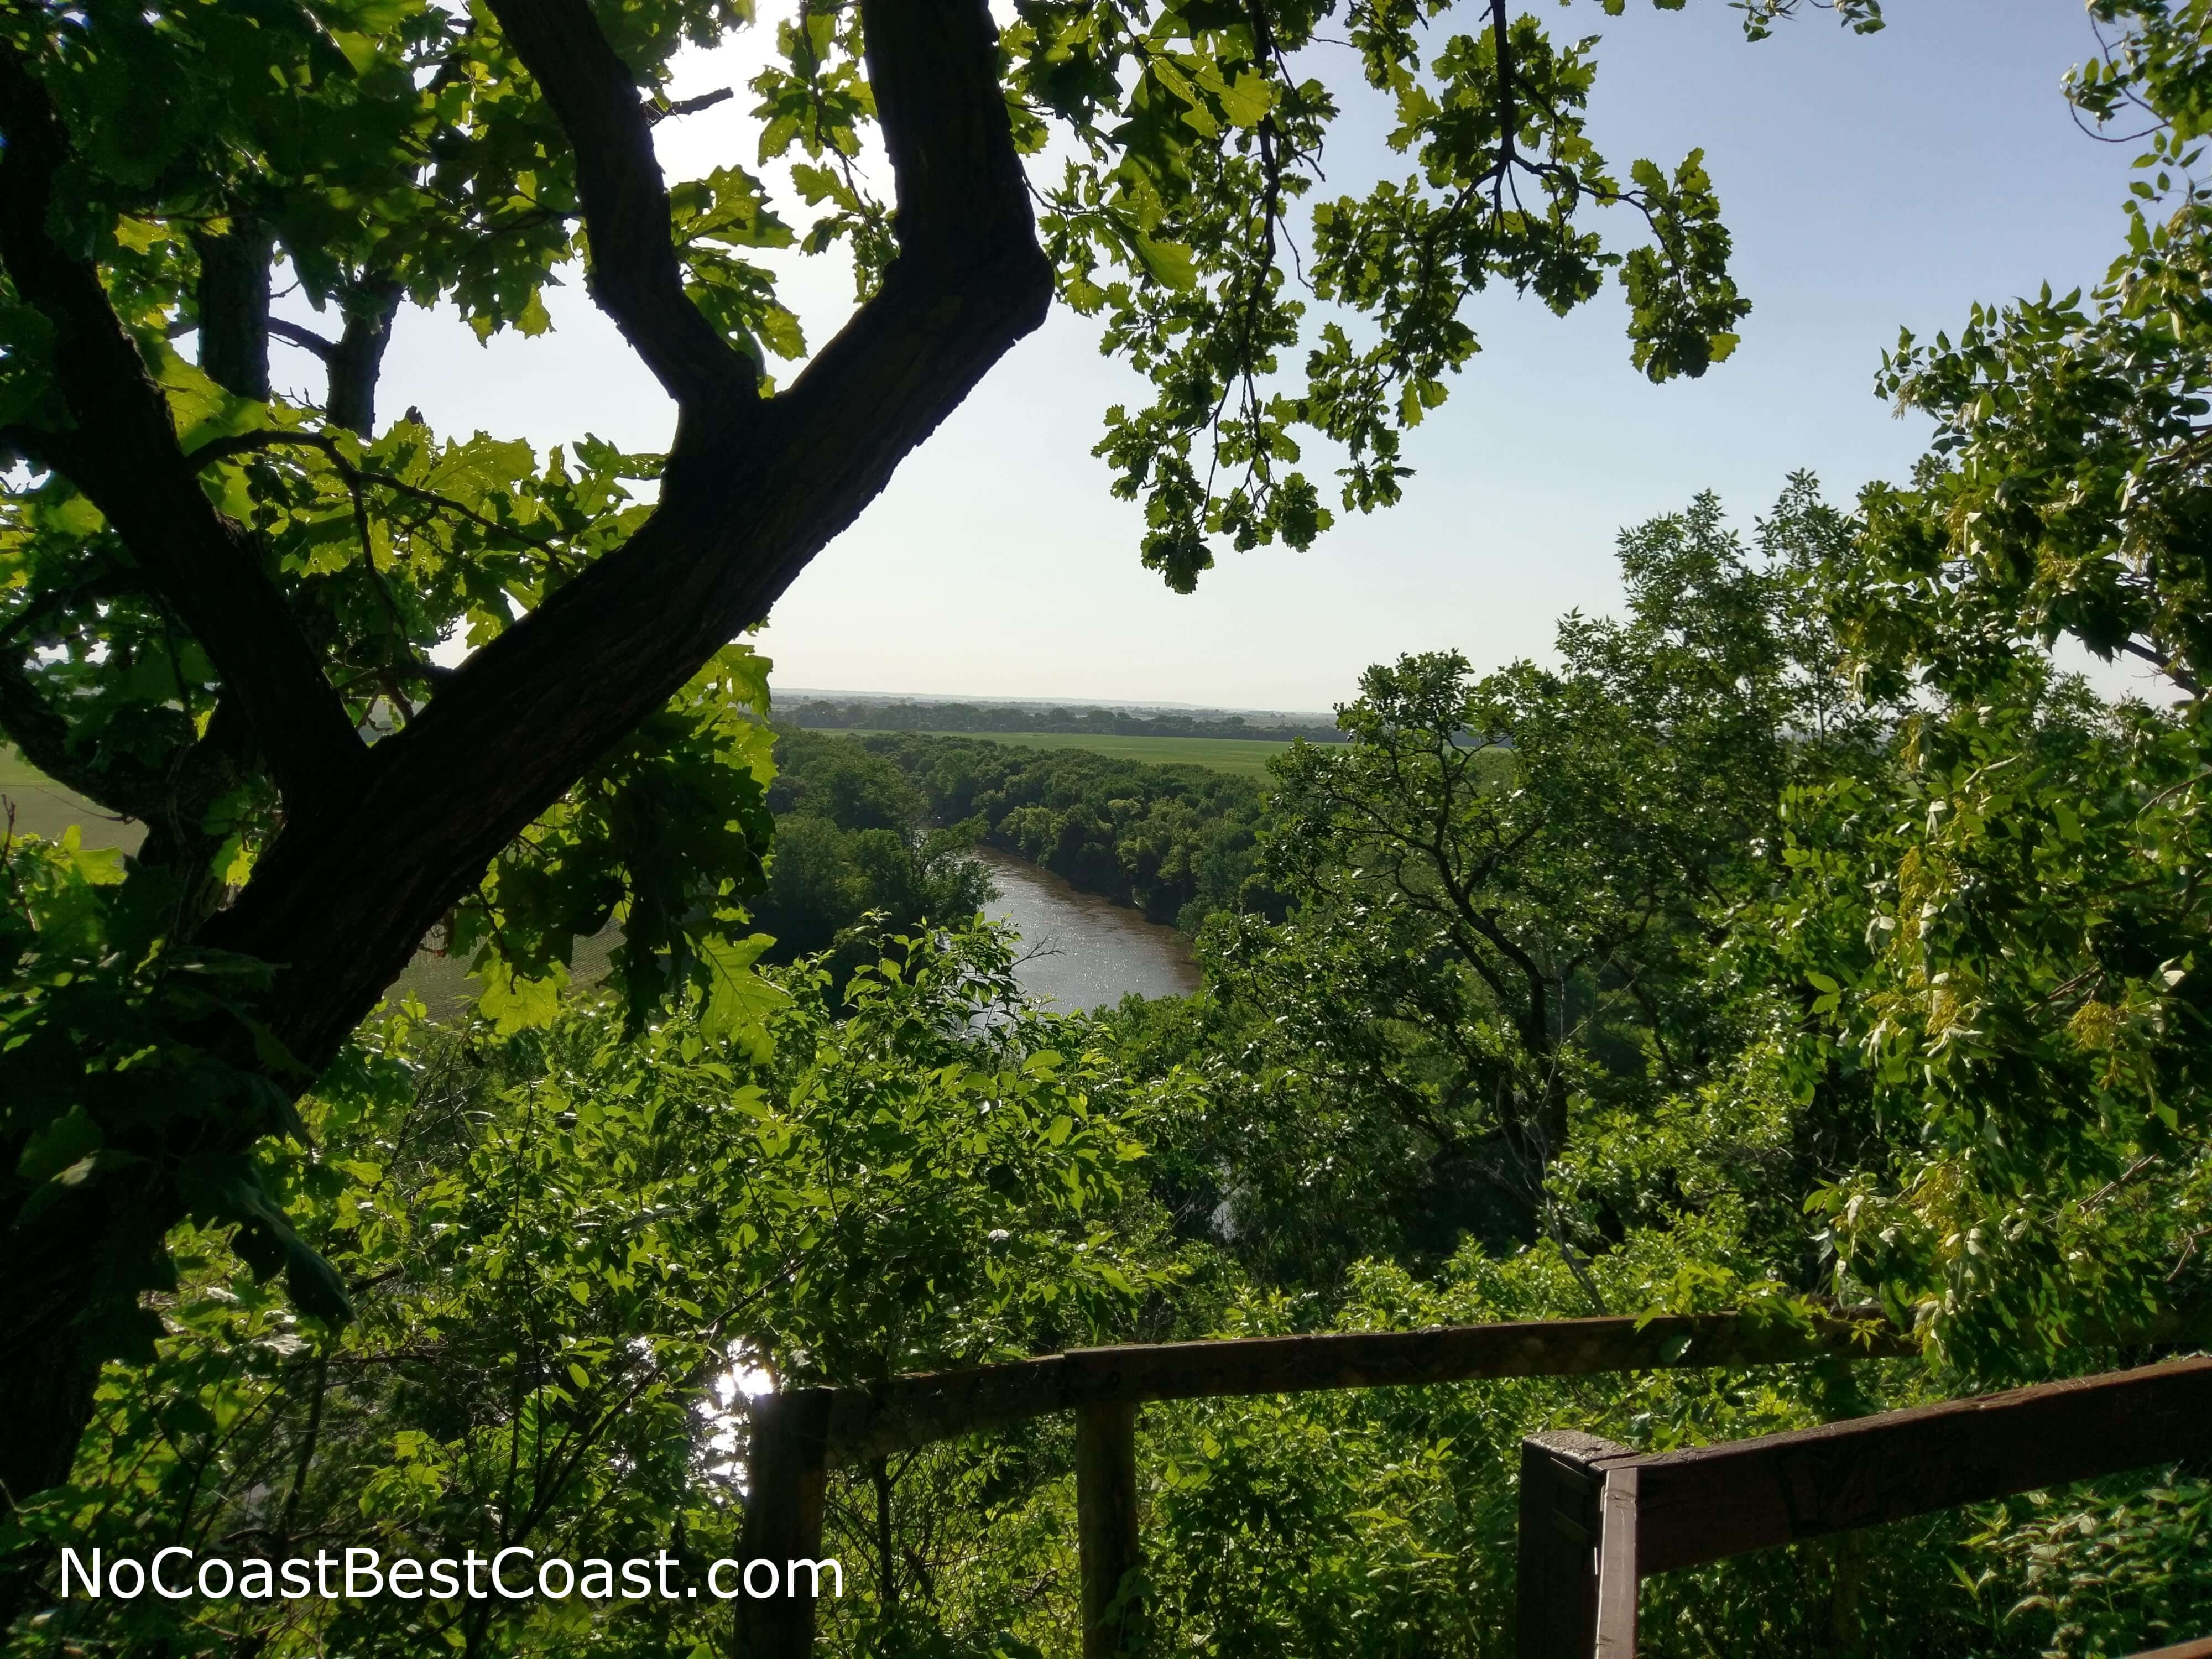 A peek of the Big Sioux River from the overlook